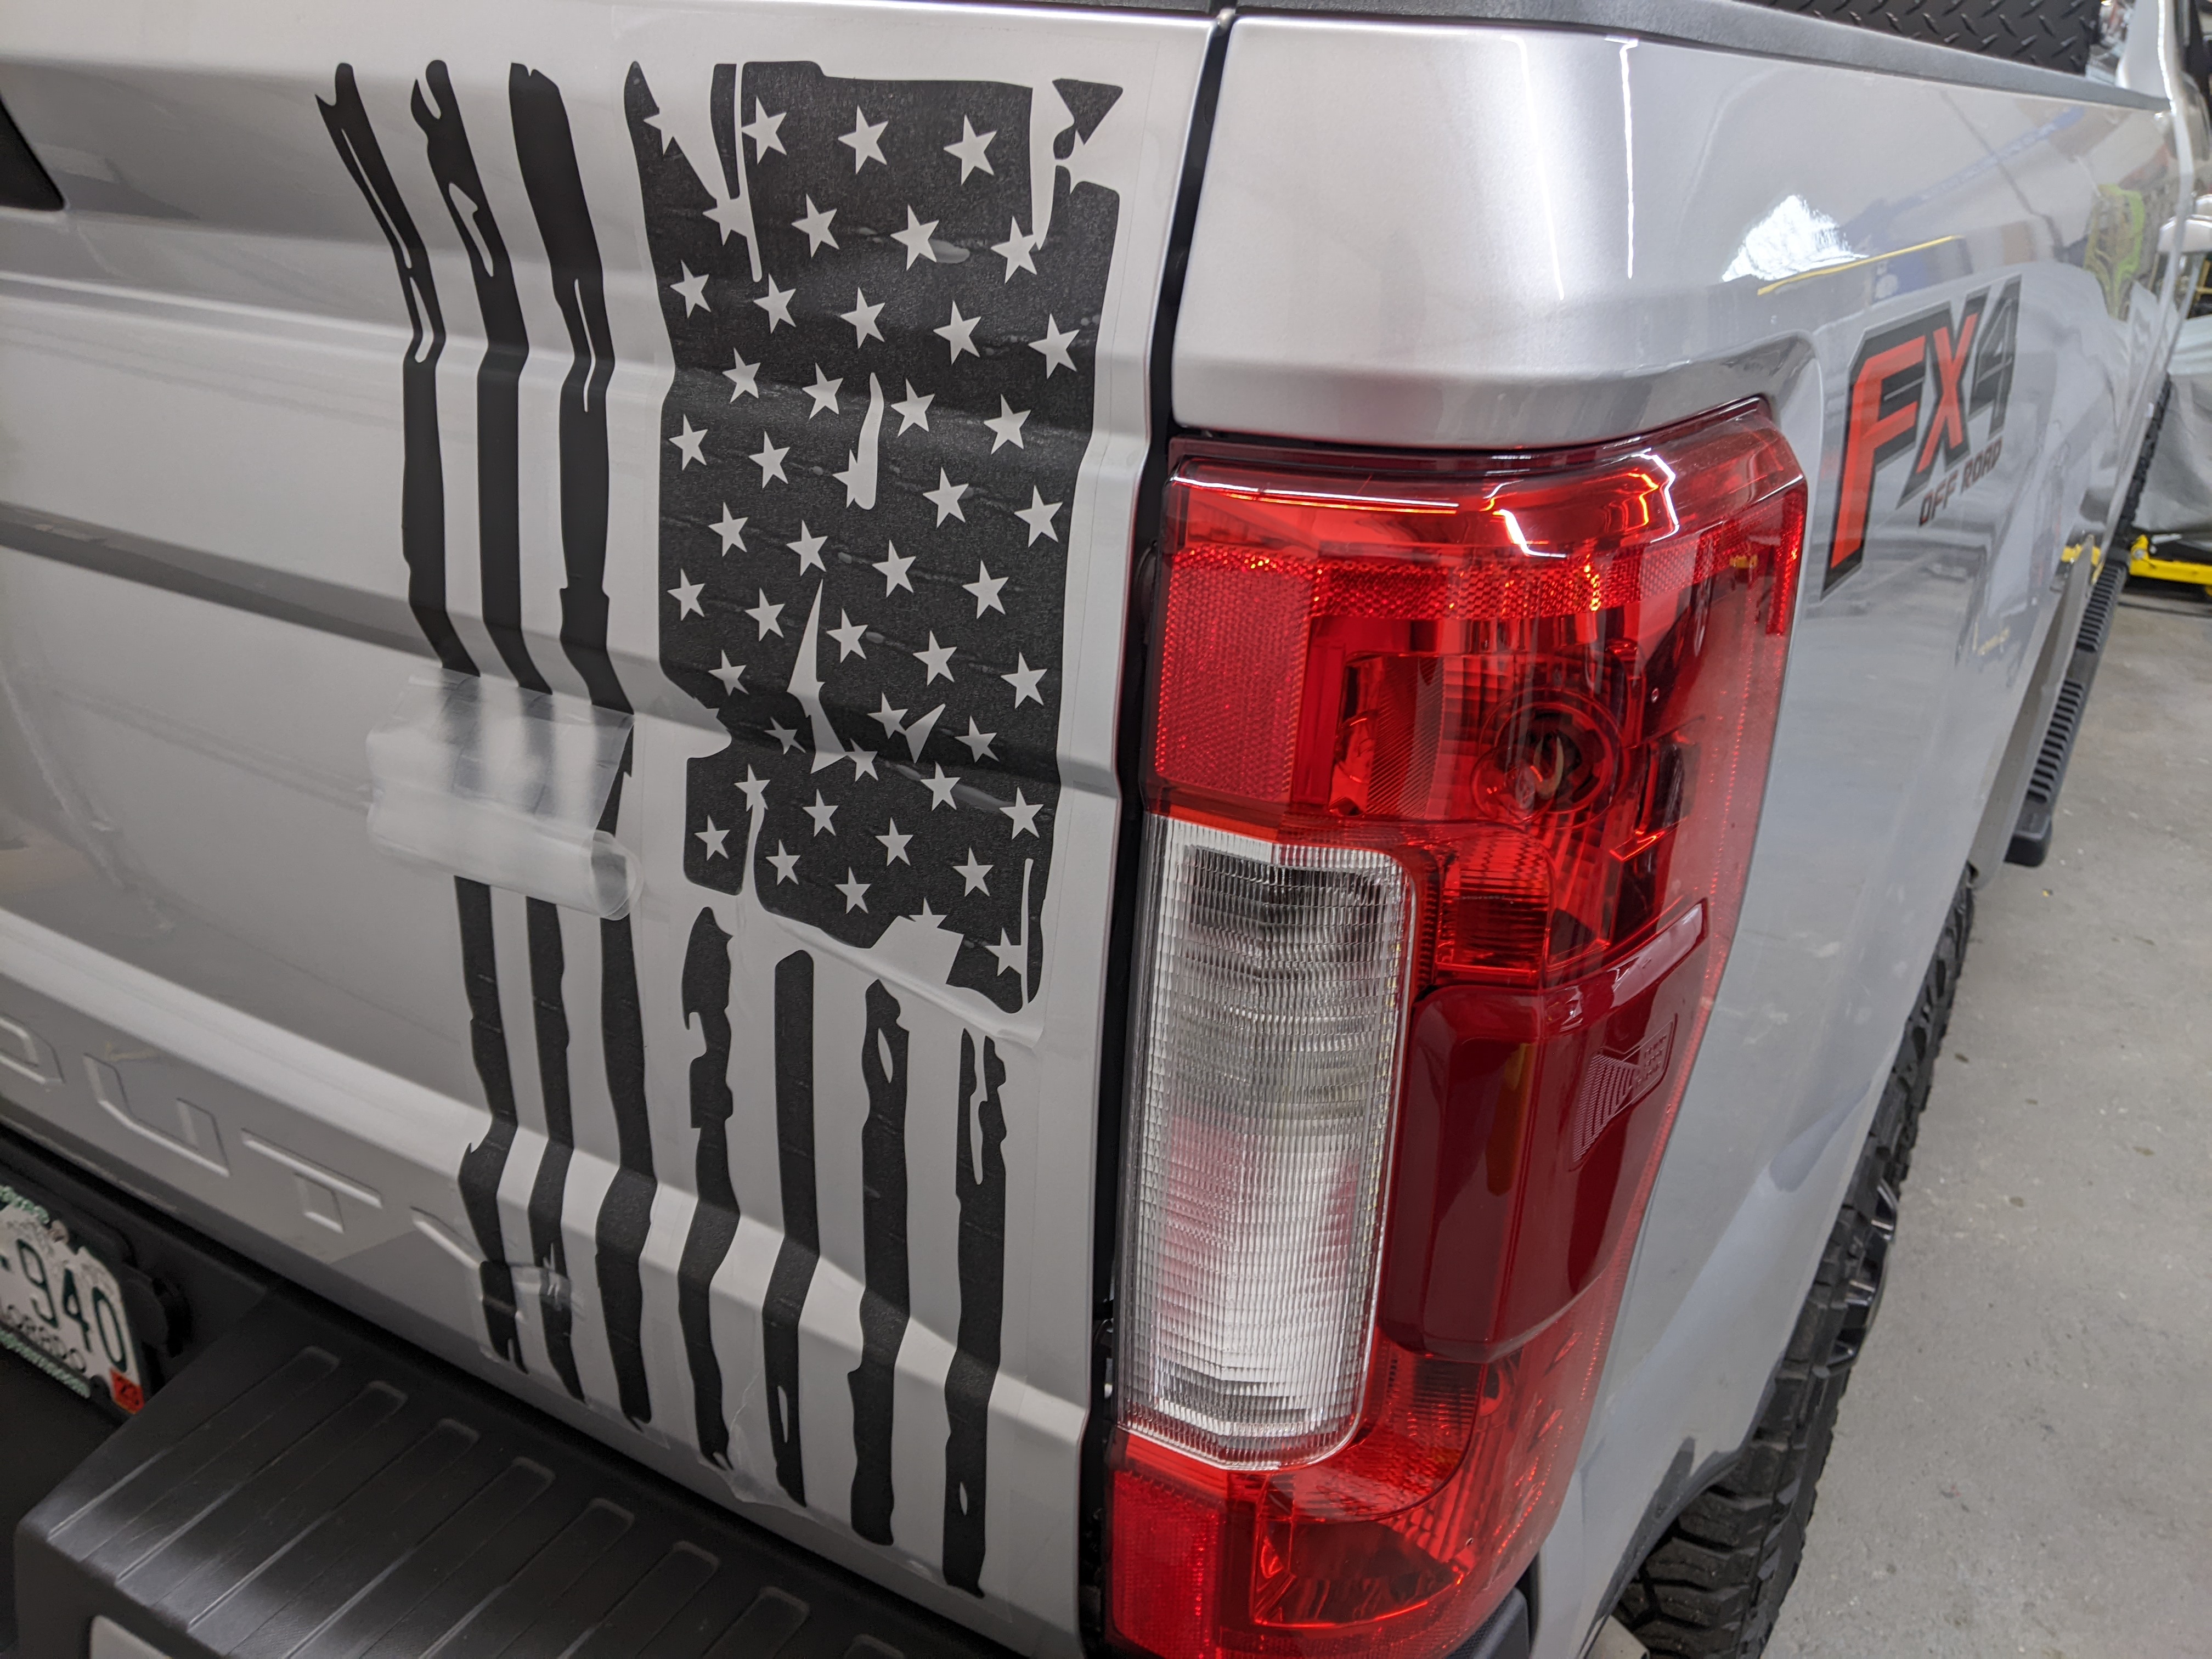 Decal applied to the tailgate of the 2019 Ford F-250.